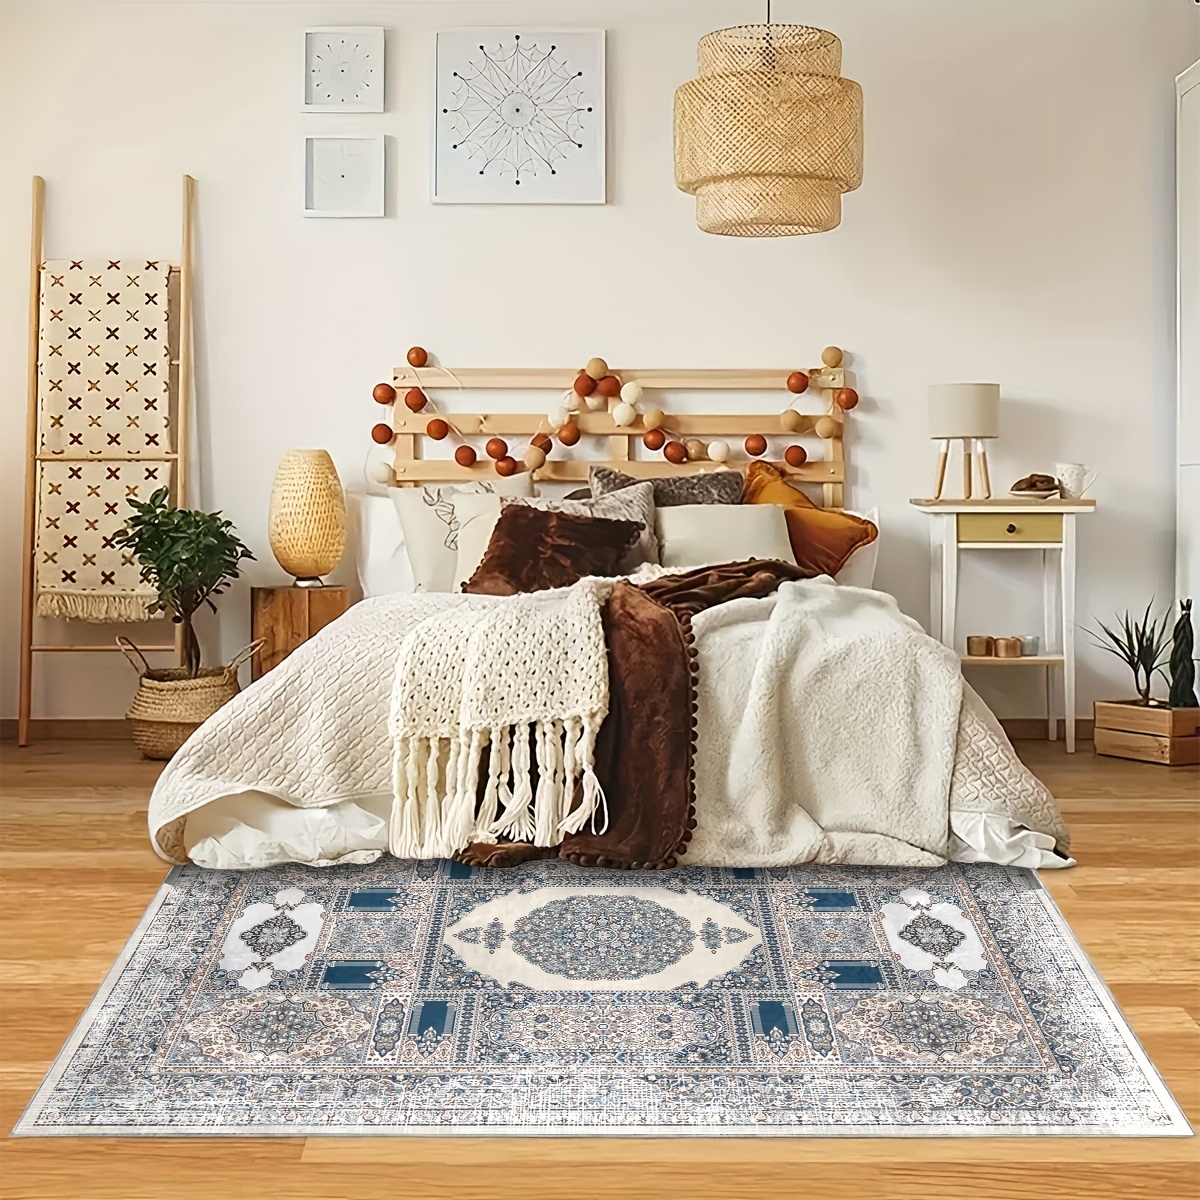  FADFAY 39 x 59 Floral Boho Rugs Vintage Style Anti Fatigue  Standing Living Room Floor Carpets Non-Skid Indoor Outdoor Retro Area Rugs:  Home & Kitchen